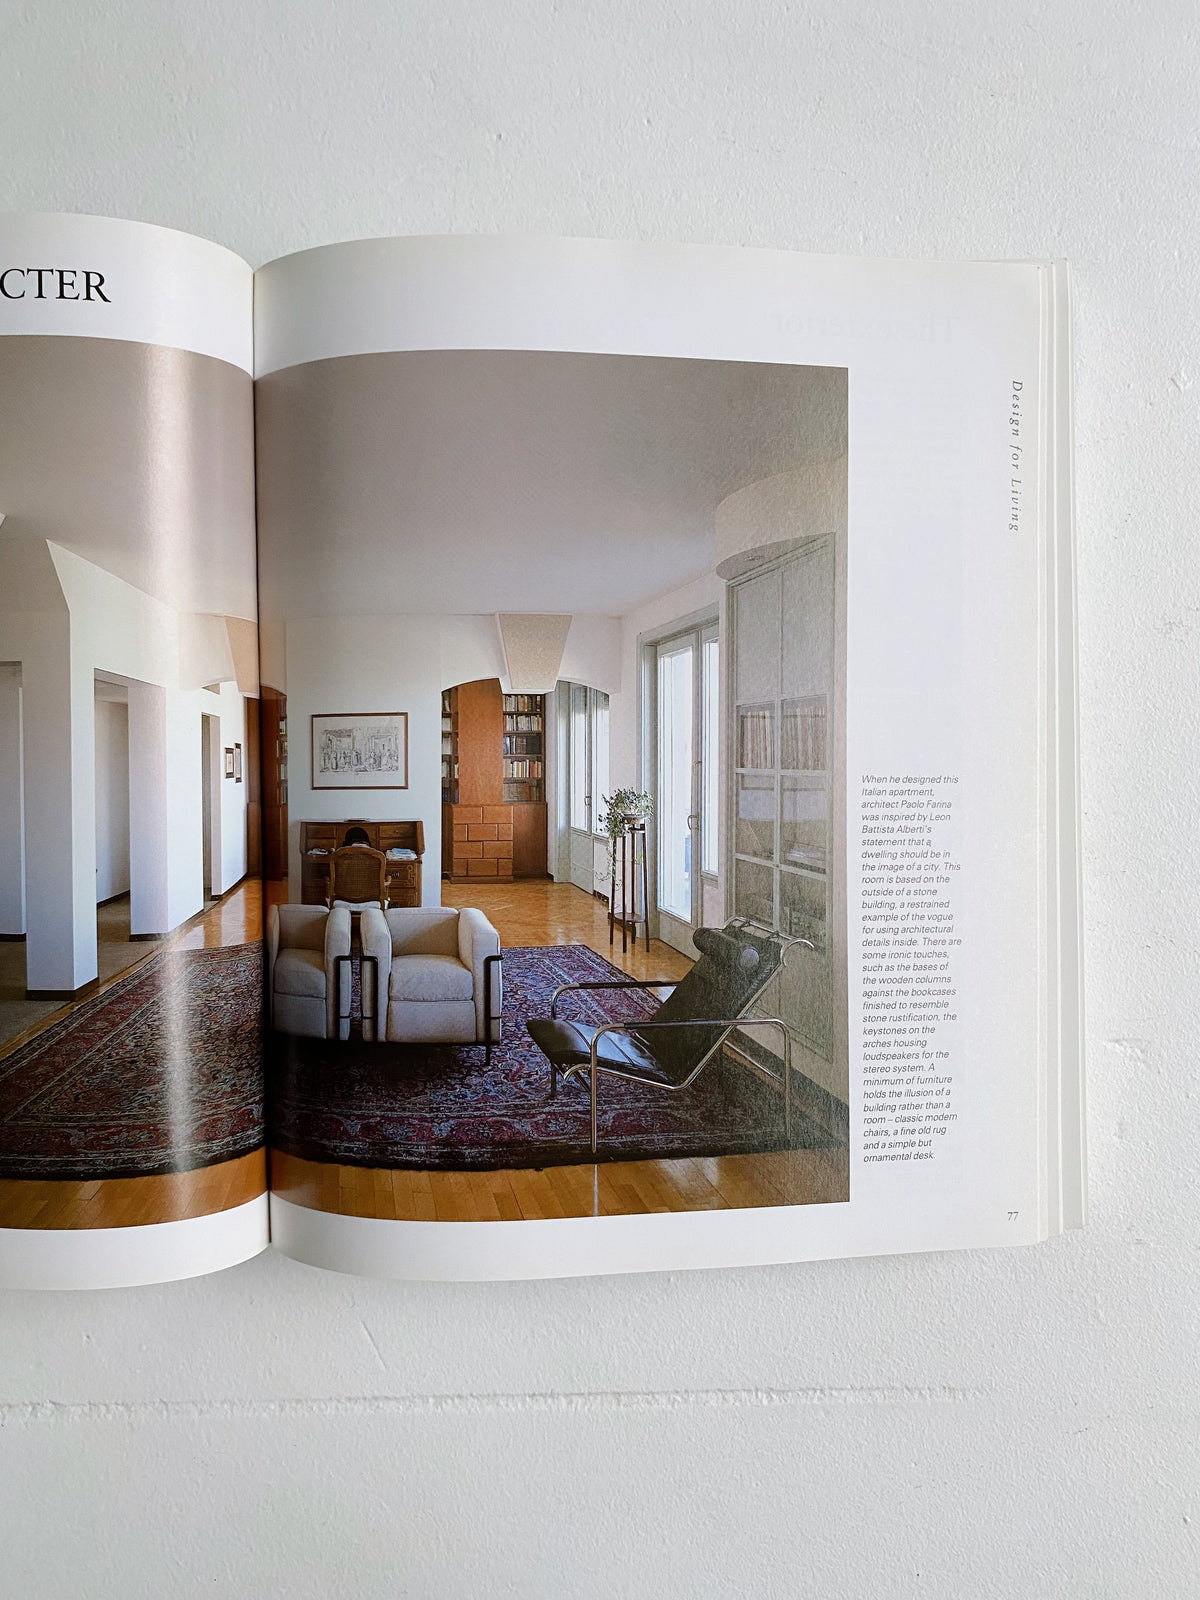 TERENCE CONRAN'S NEW HOUSE BOOK, 1985 | Maison Singulier